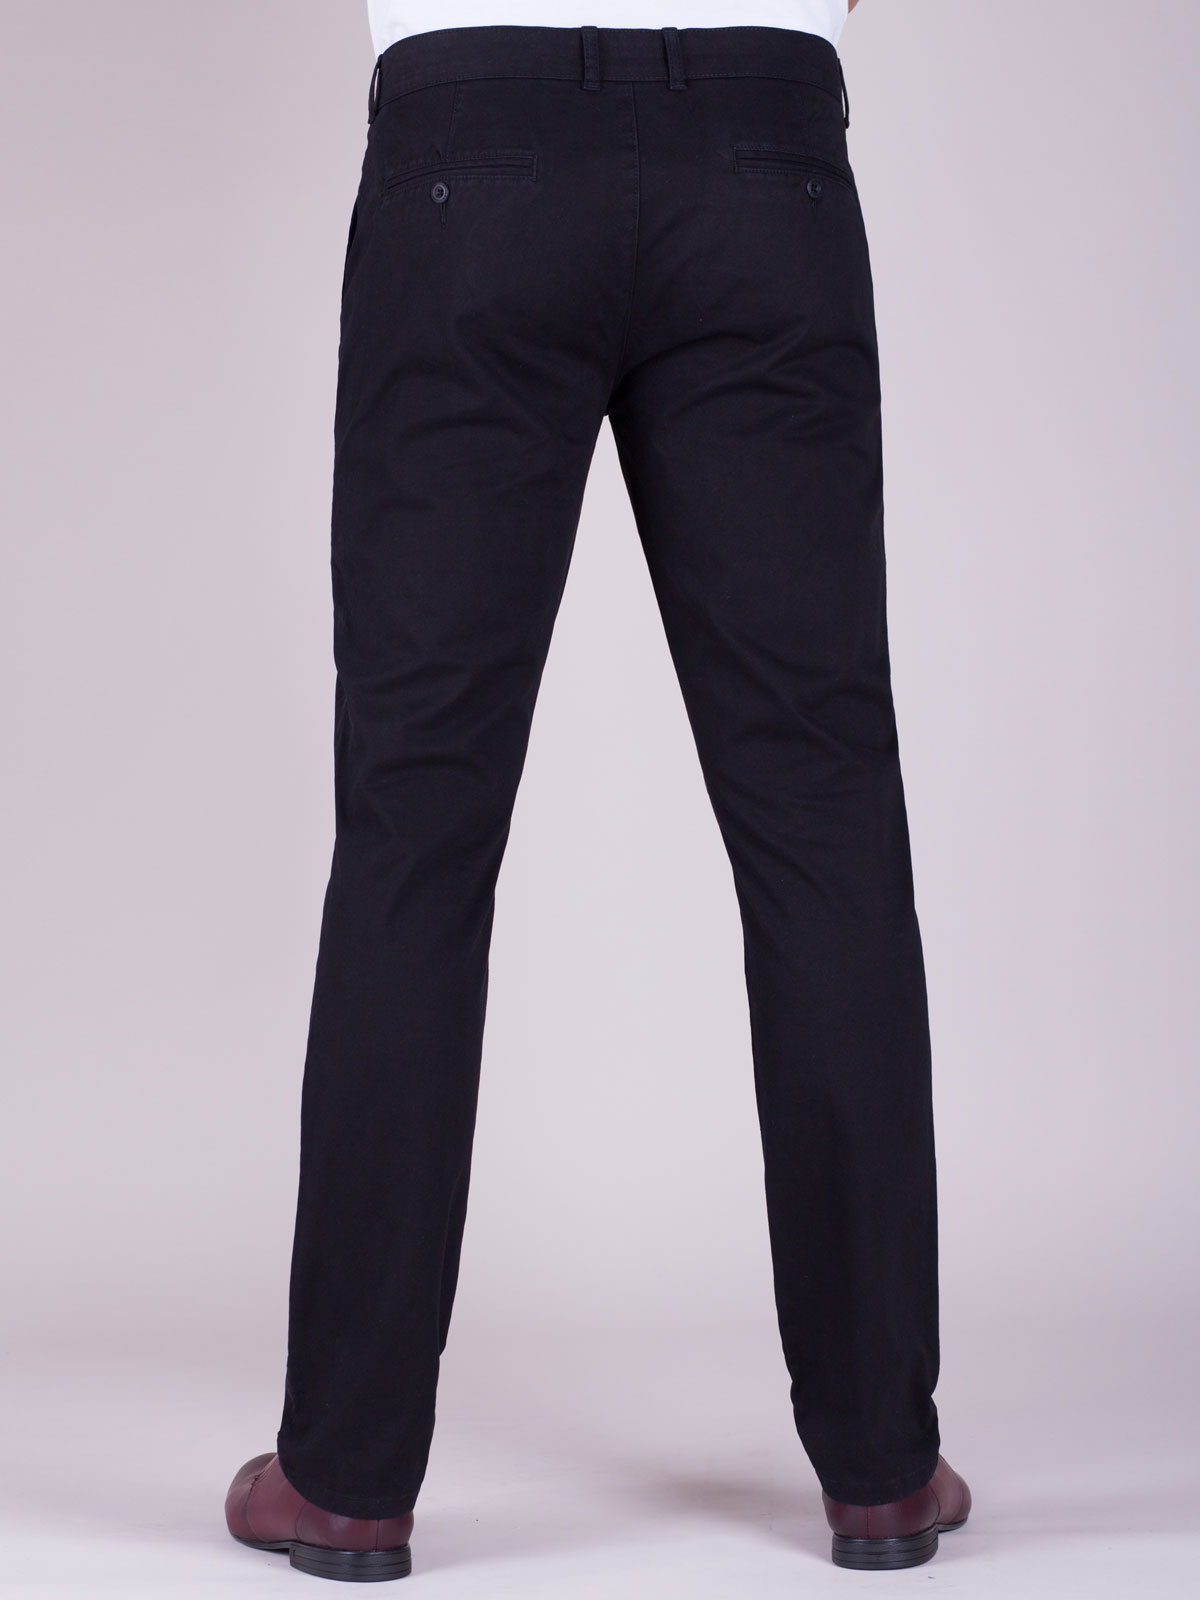 Black cotton trousers with embroidered - 60269 € 21.93 img3